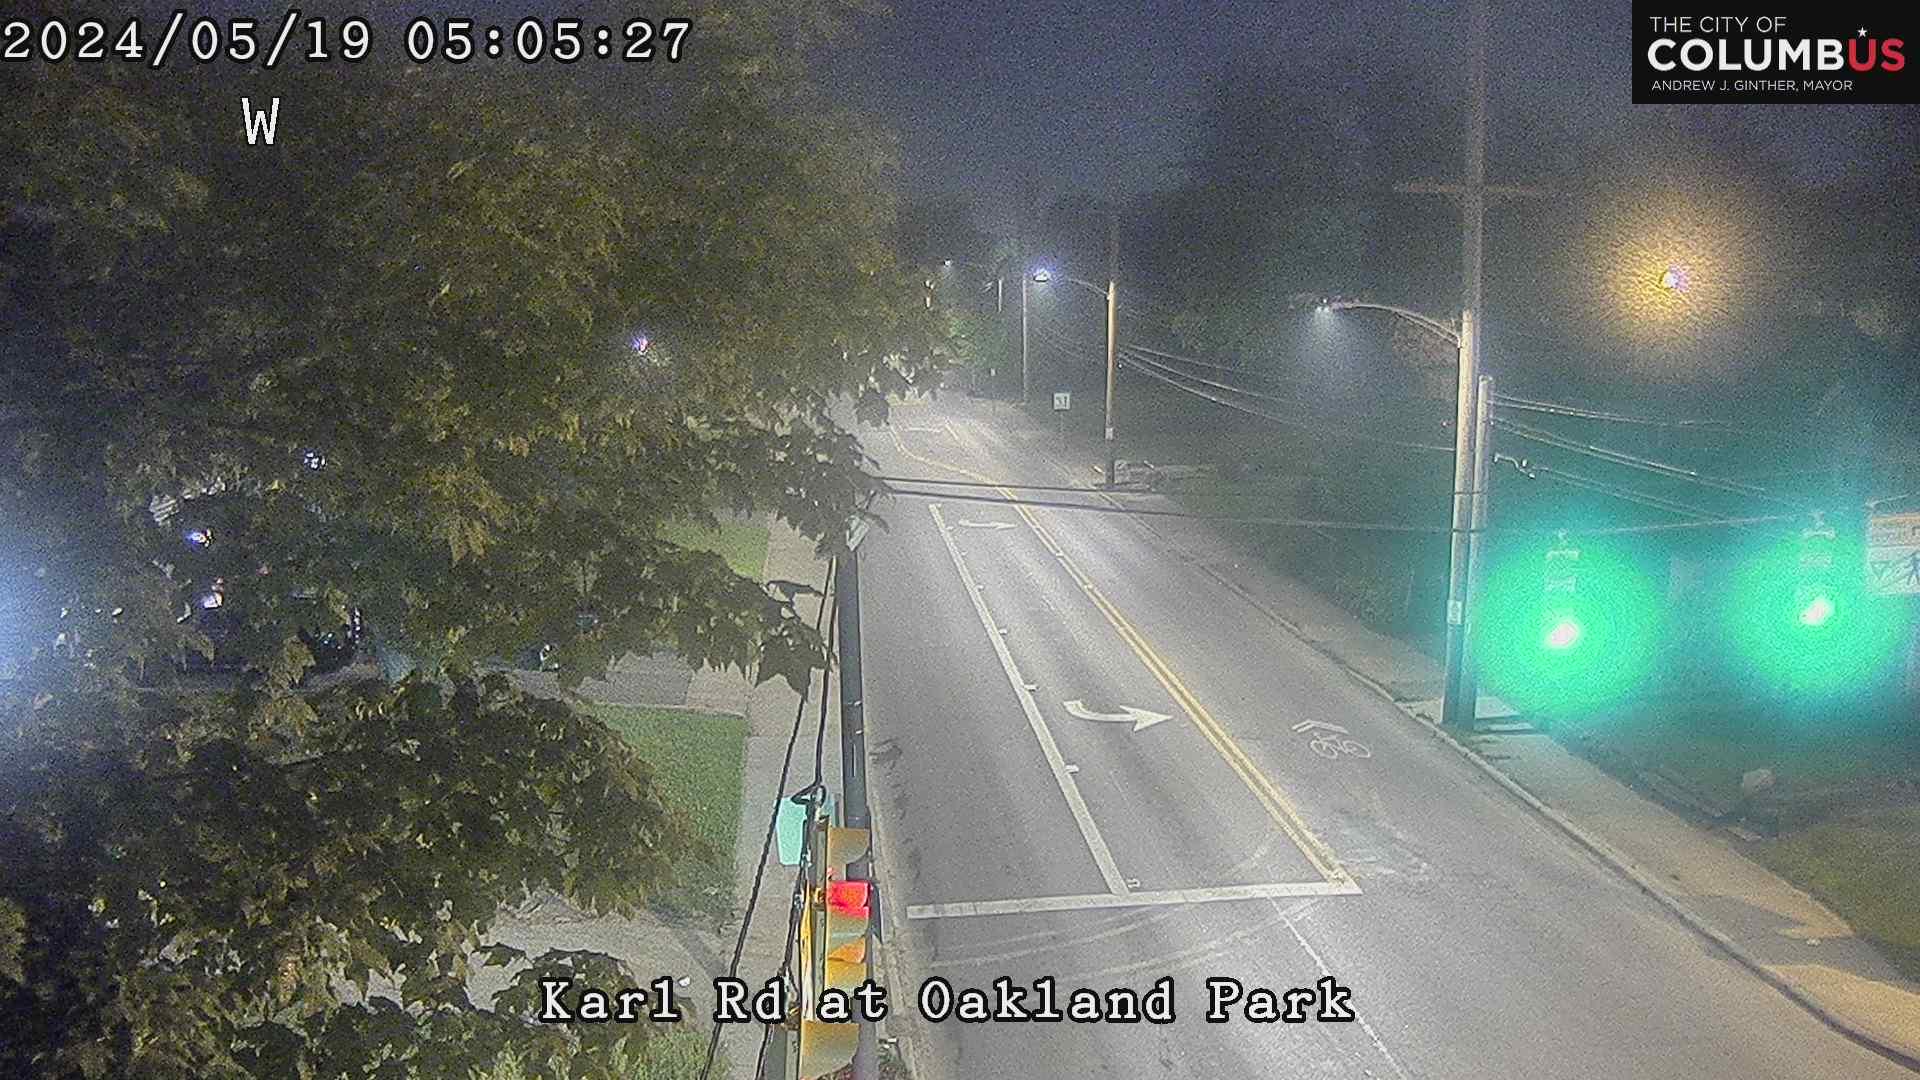 Traffic Cam Columbus: City of - Karl Rd at Oakland Park Ave